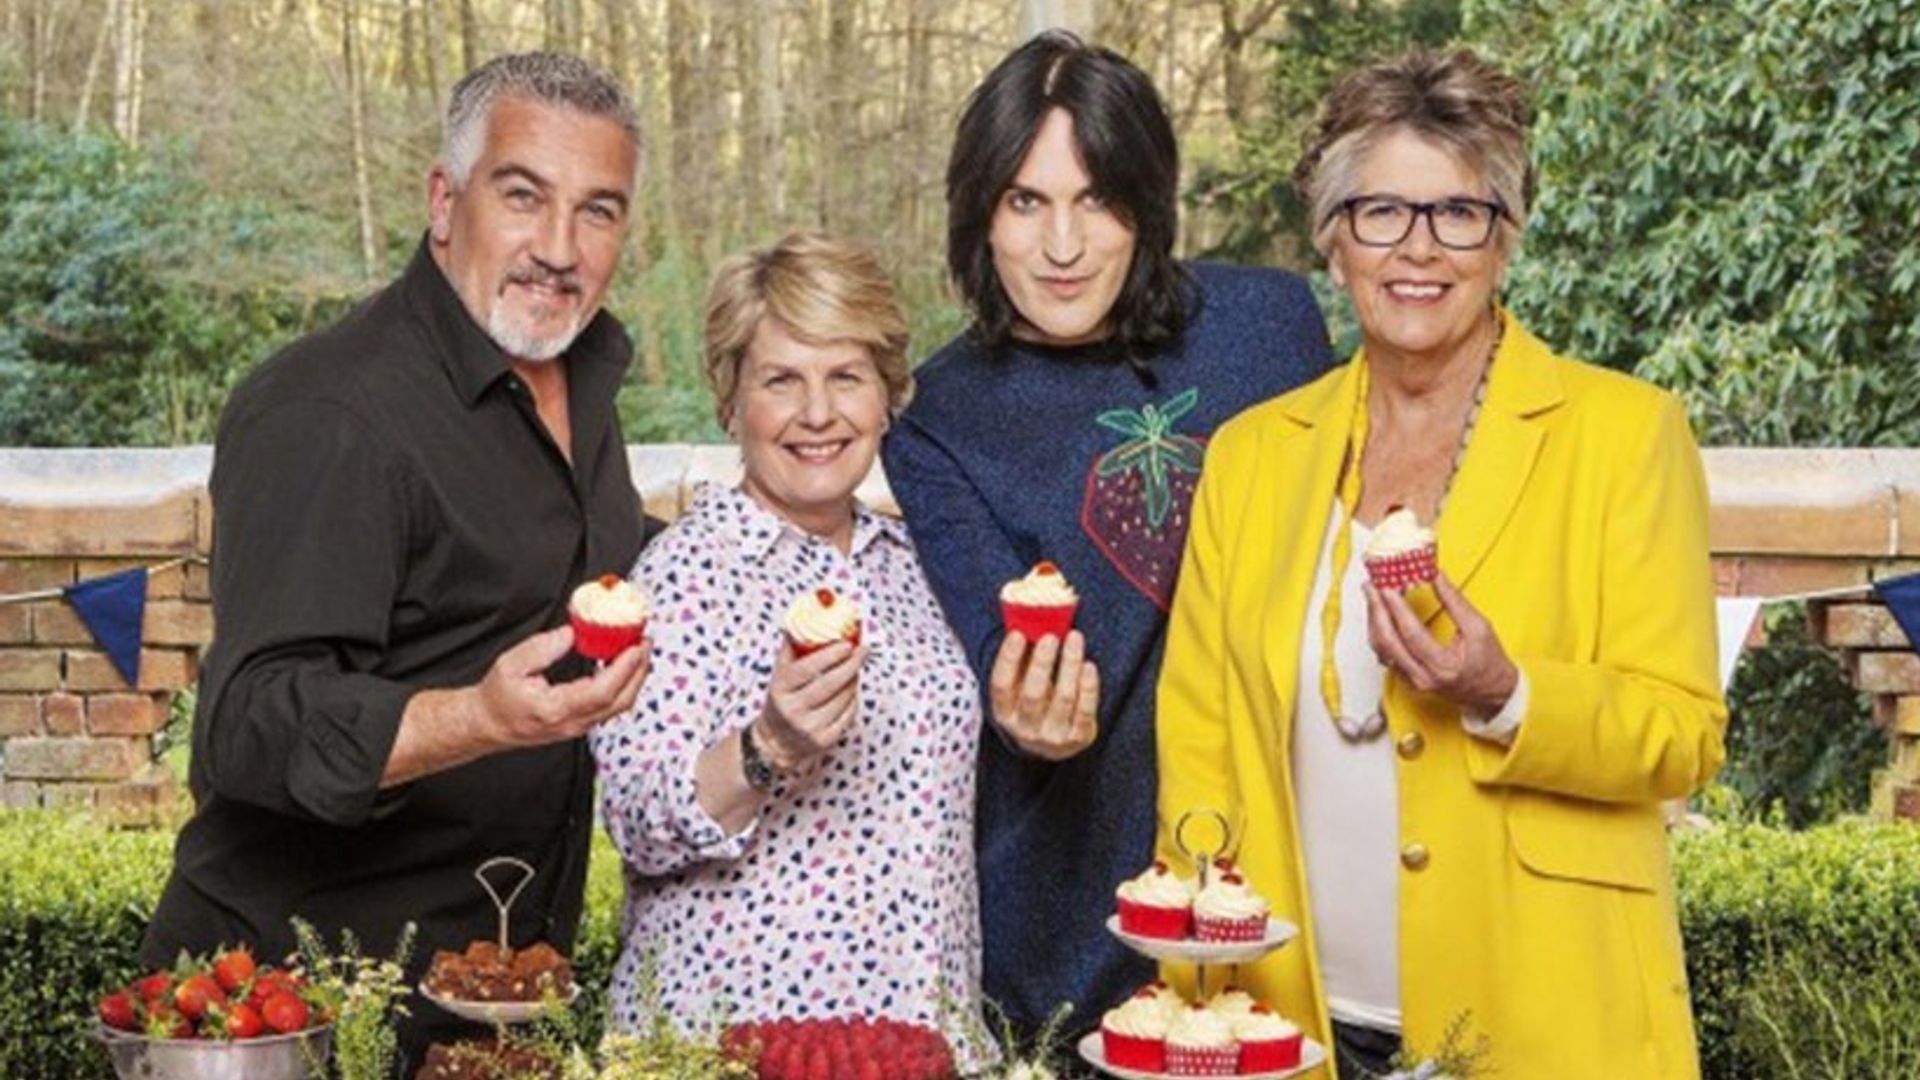 WATCH: The trailer for Great British Bake Off is here!